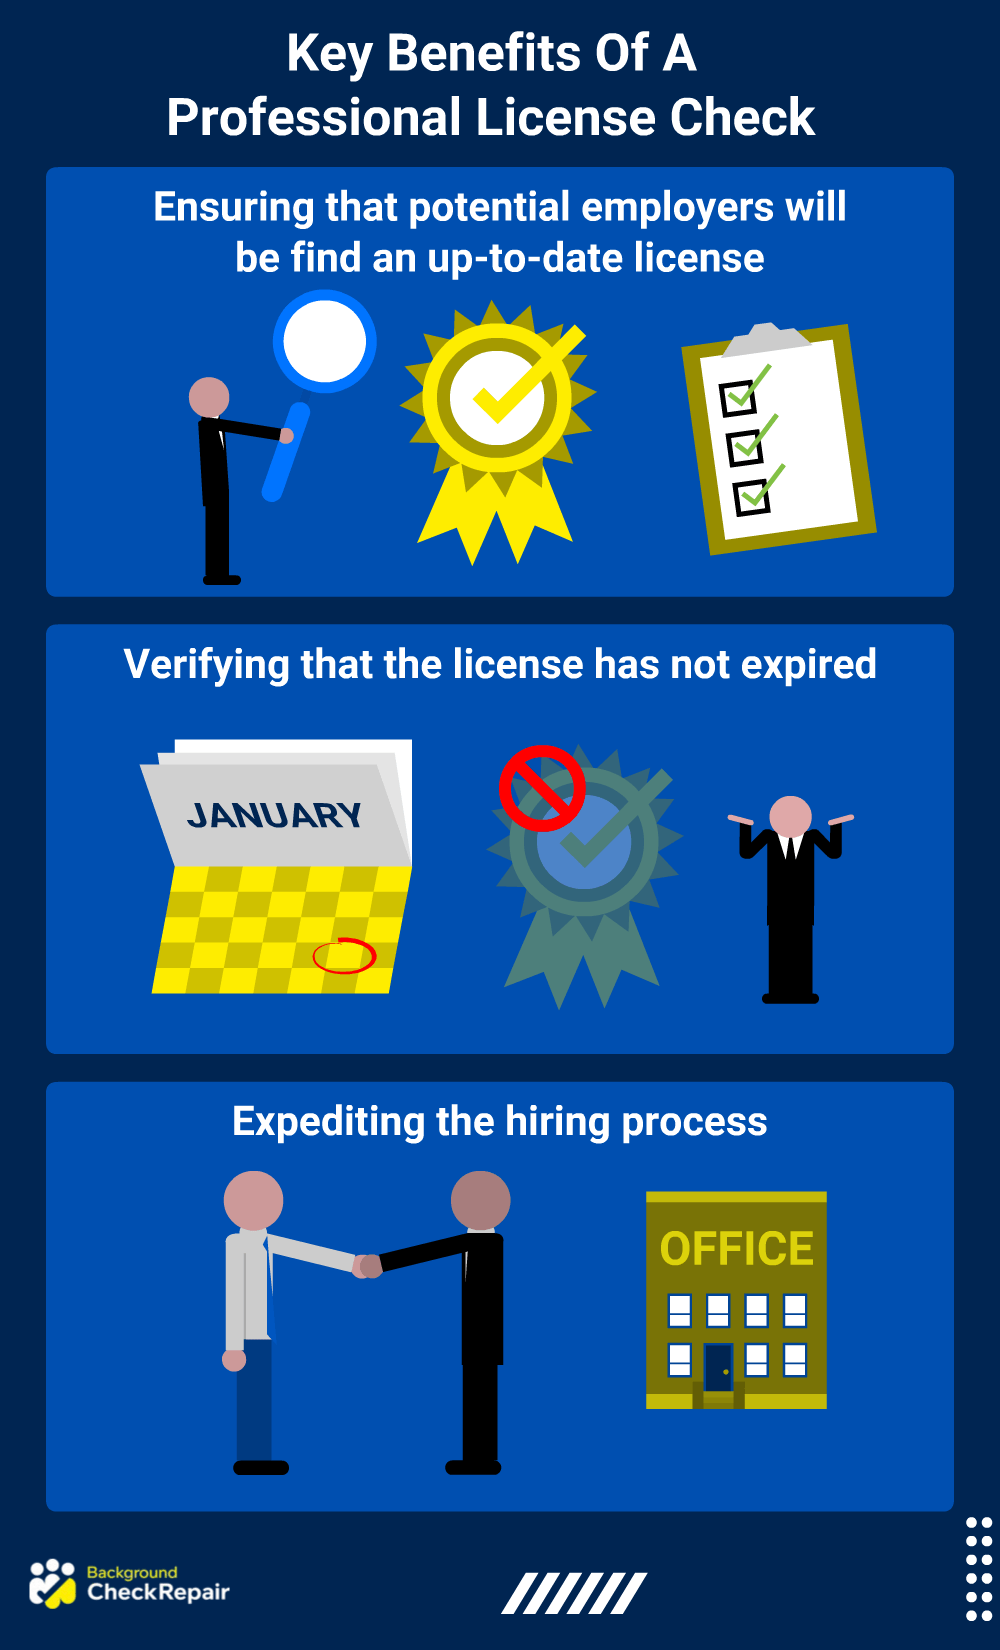 Graphic showing benefits of professional license verification including improved hiring process, work and experience verification and state valid licenses.